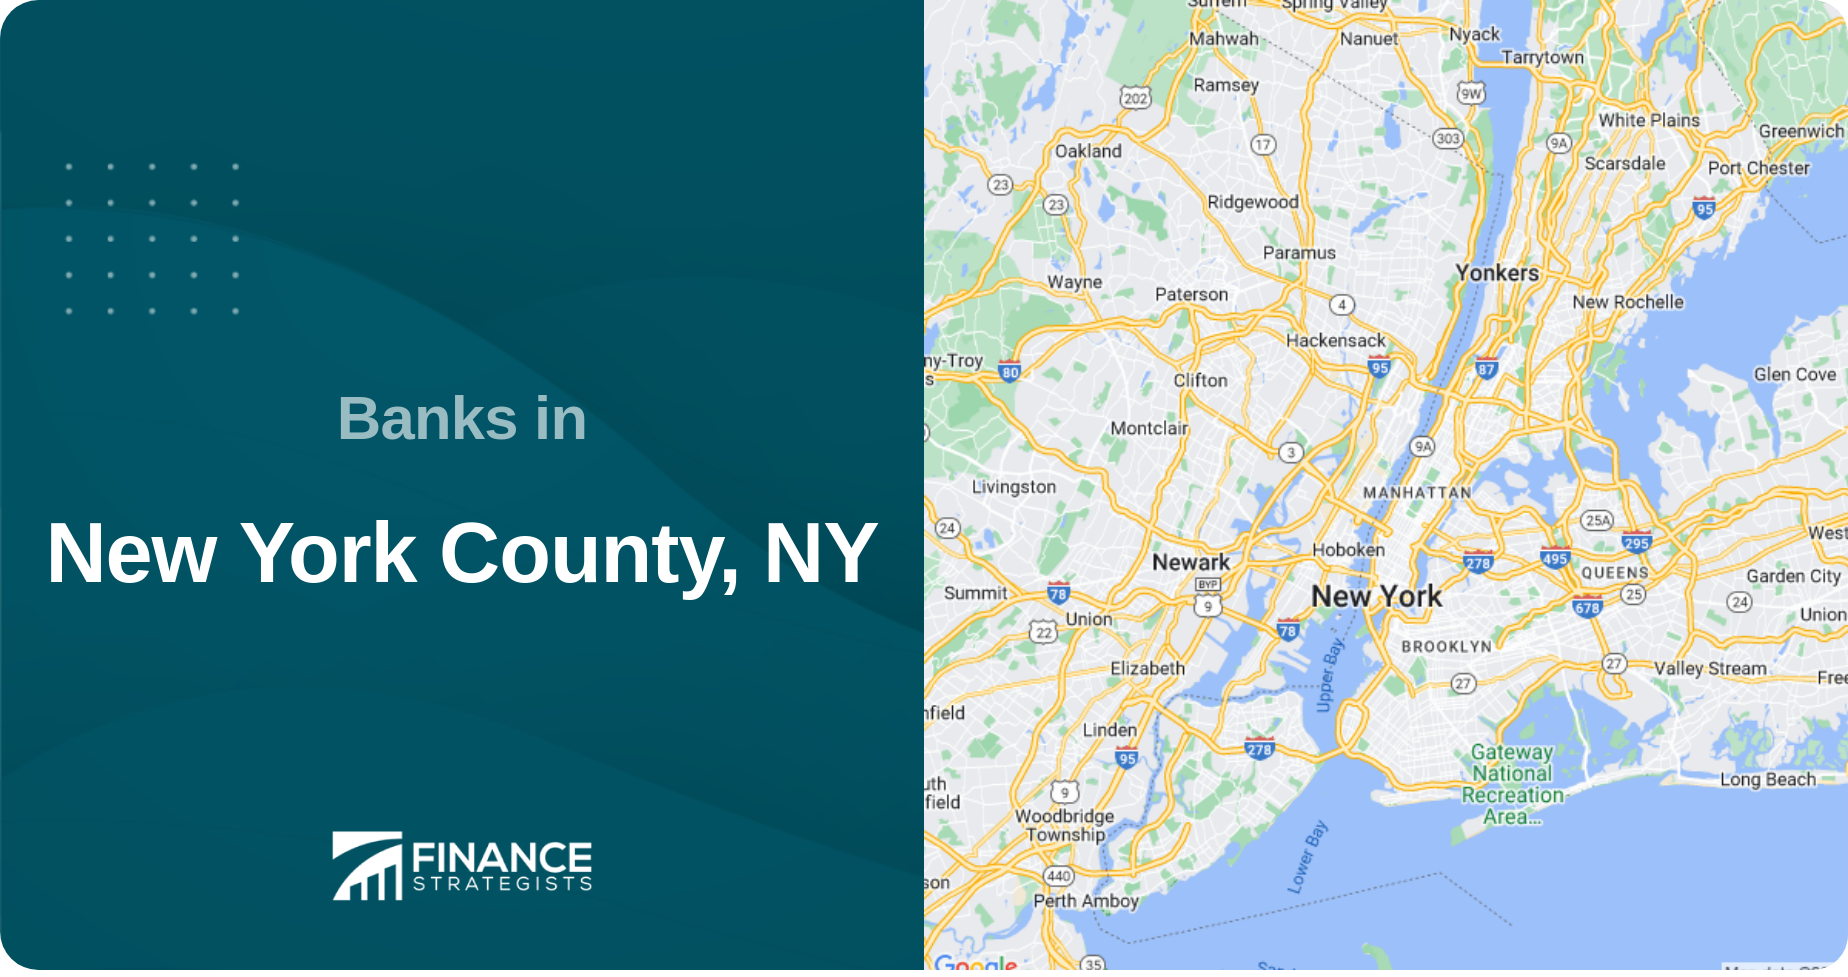 Banks in New York County, NY